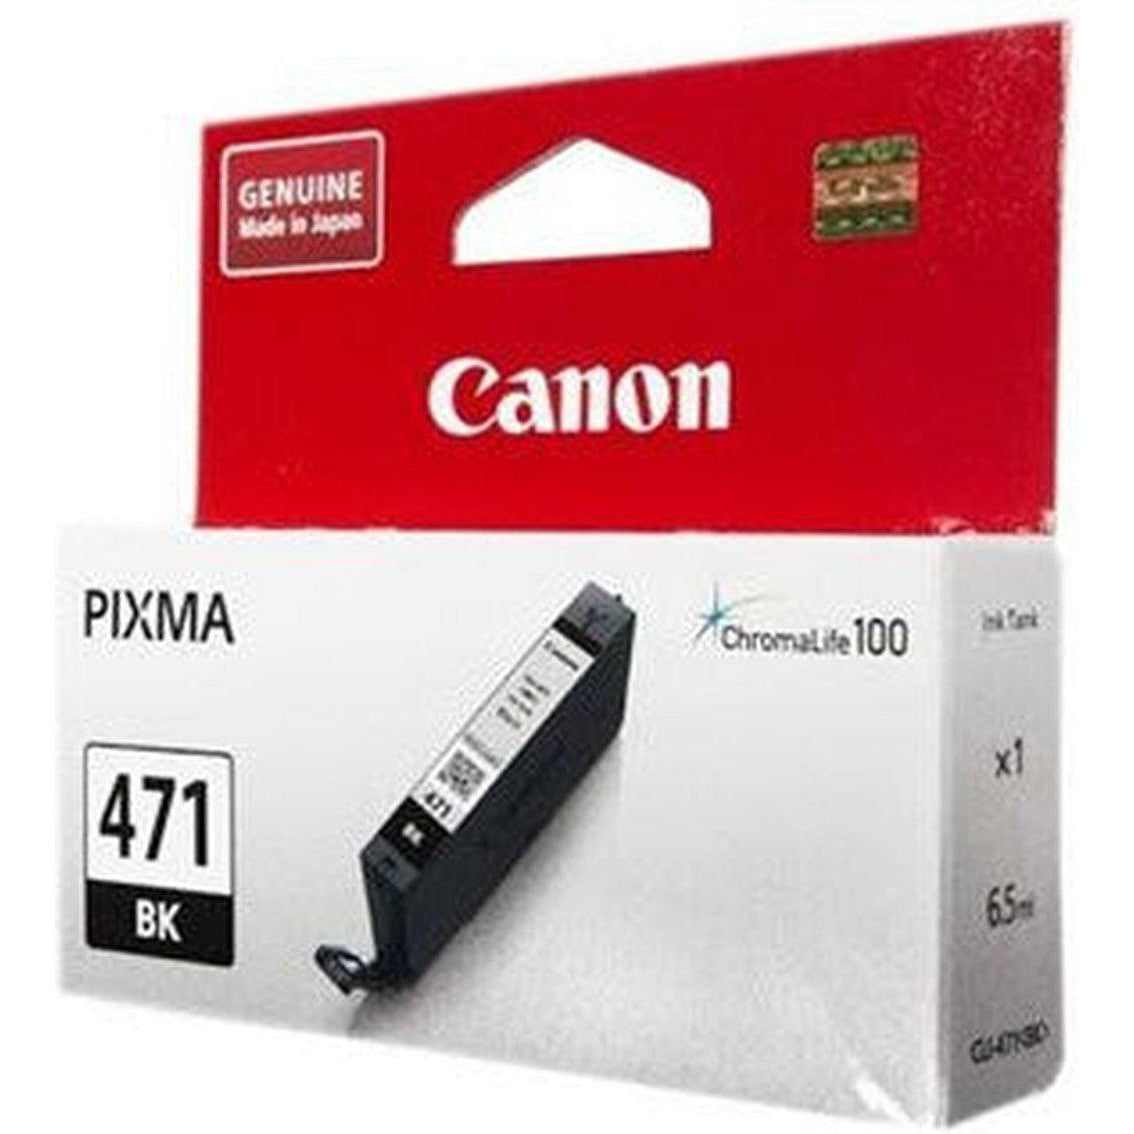 Canon 471 Black Ink-Inks And Toners-Canon-Star Light Kuwait